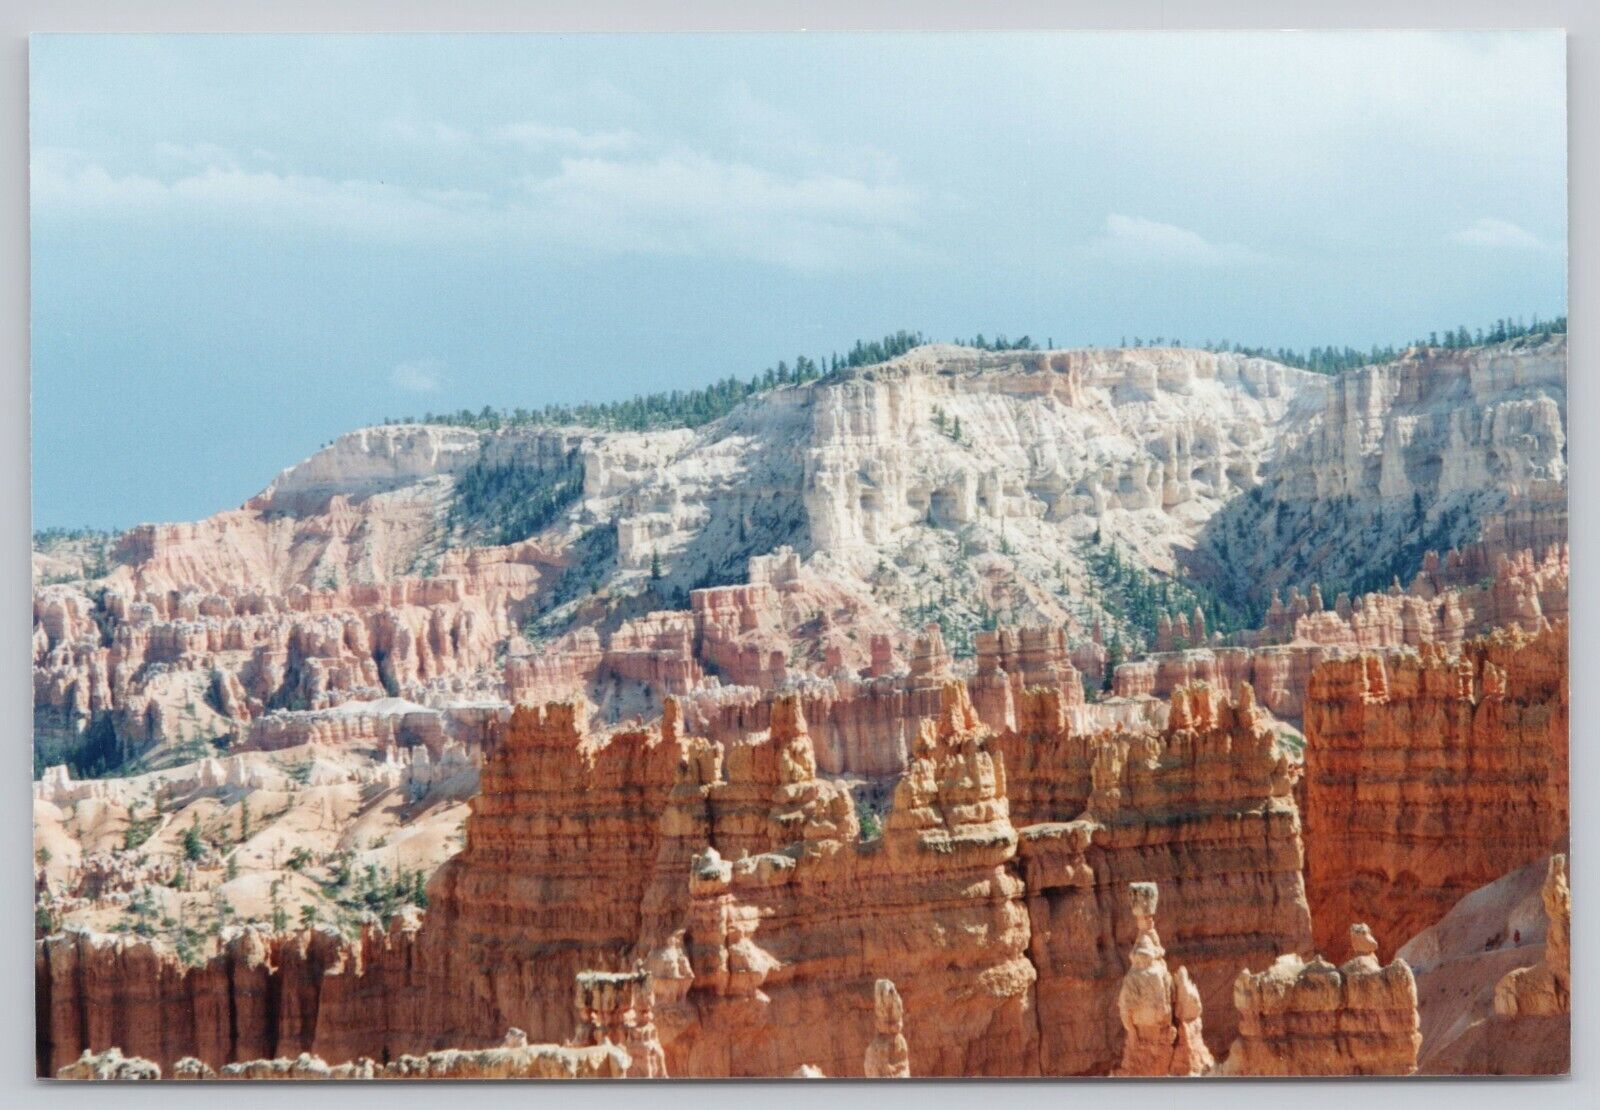 Bryce Canyon National Park Utah, Scenic View, Vintage Photo